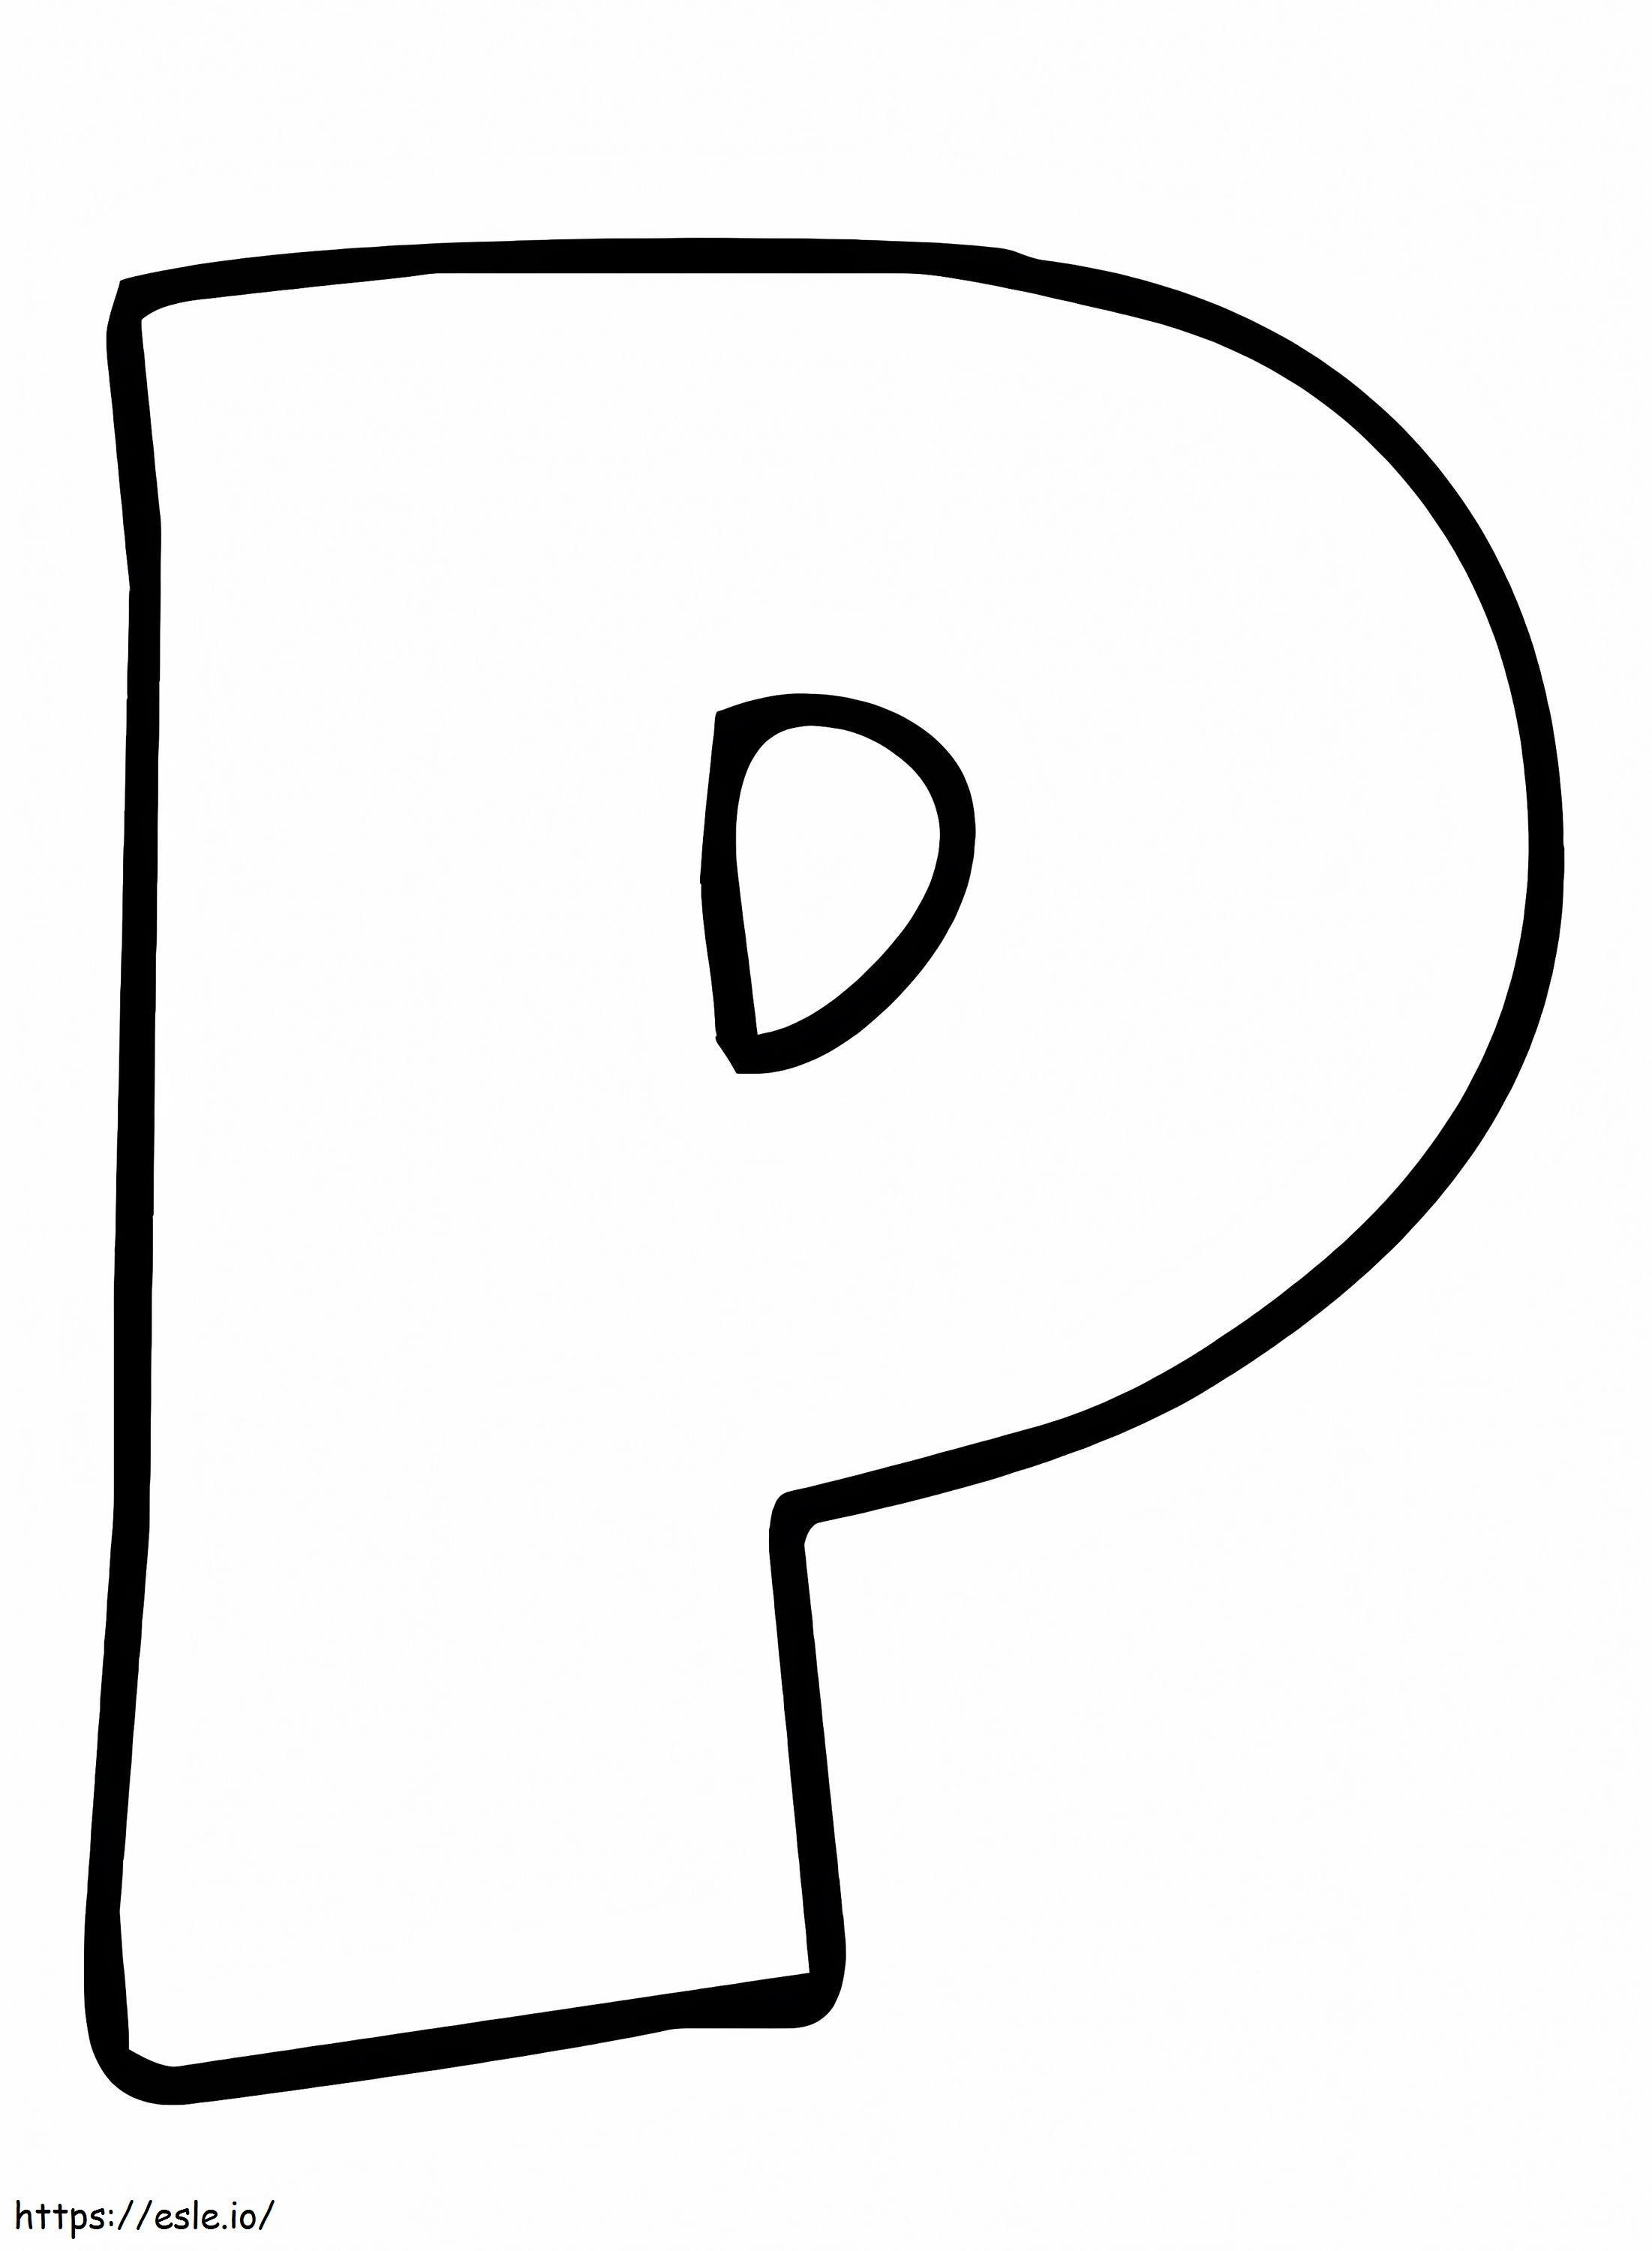 Simple Letter P coloring page